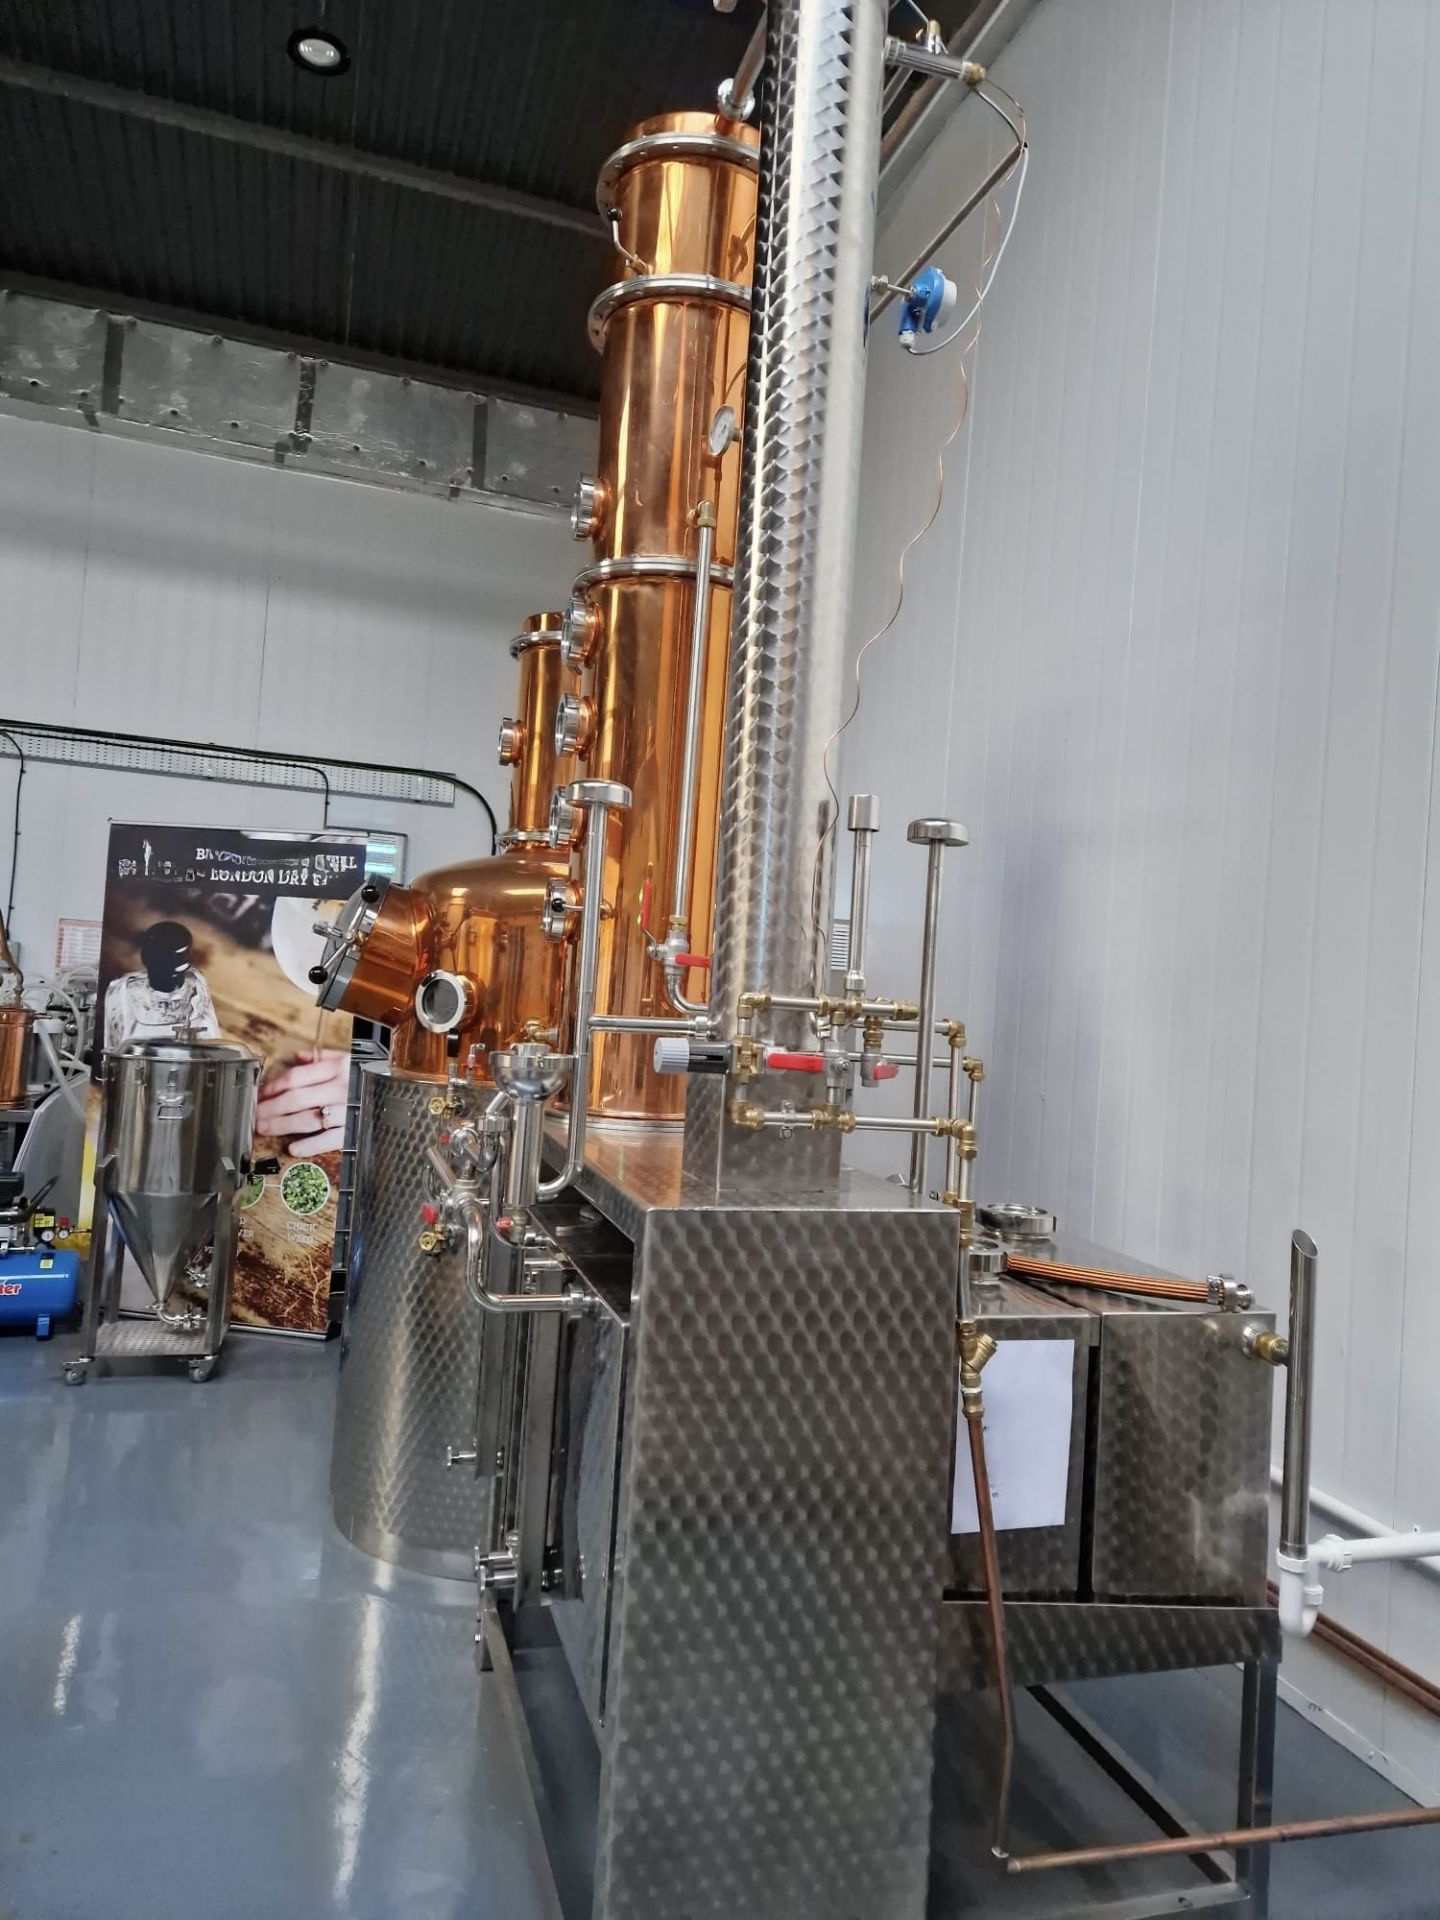 Arnold Holstein SH1000, 450L Pot Still. Installed and commissioned March 2022 - Image 2 of 9